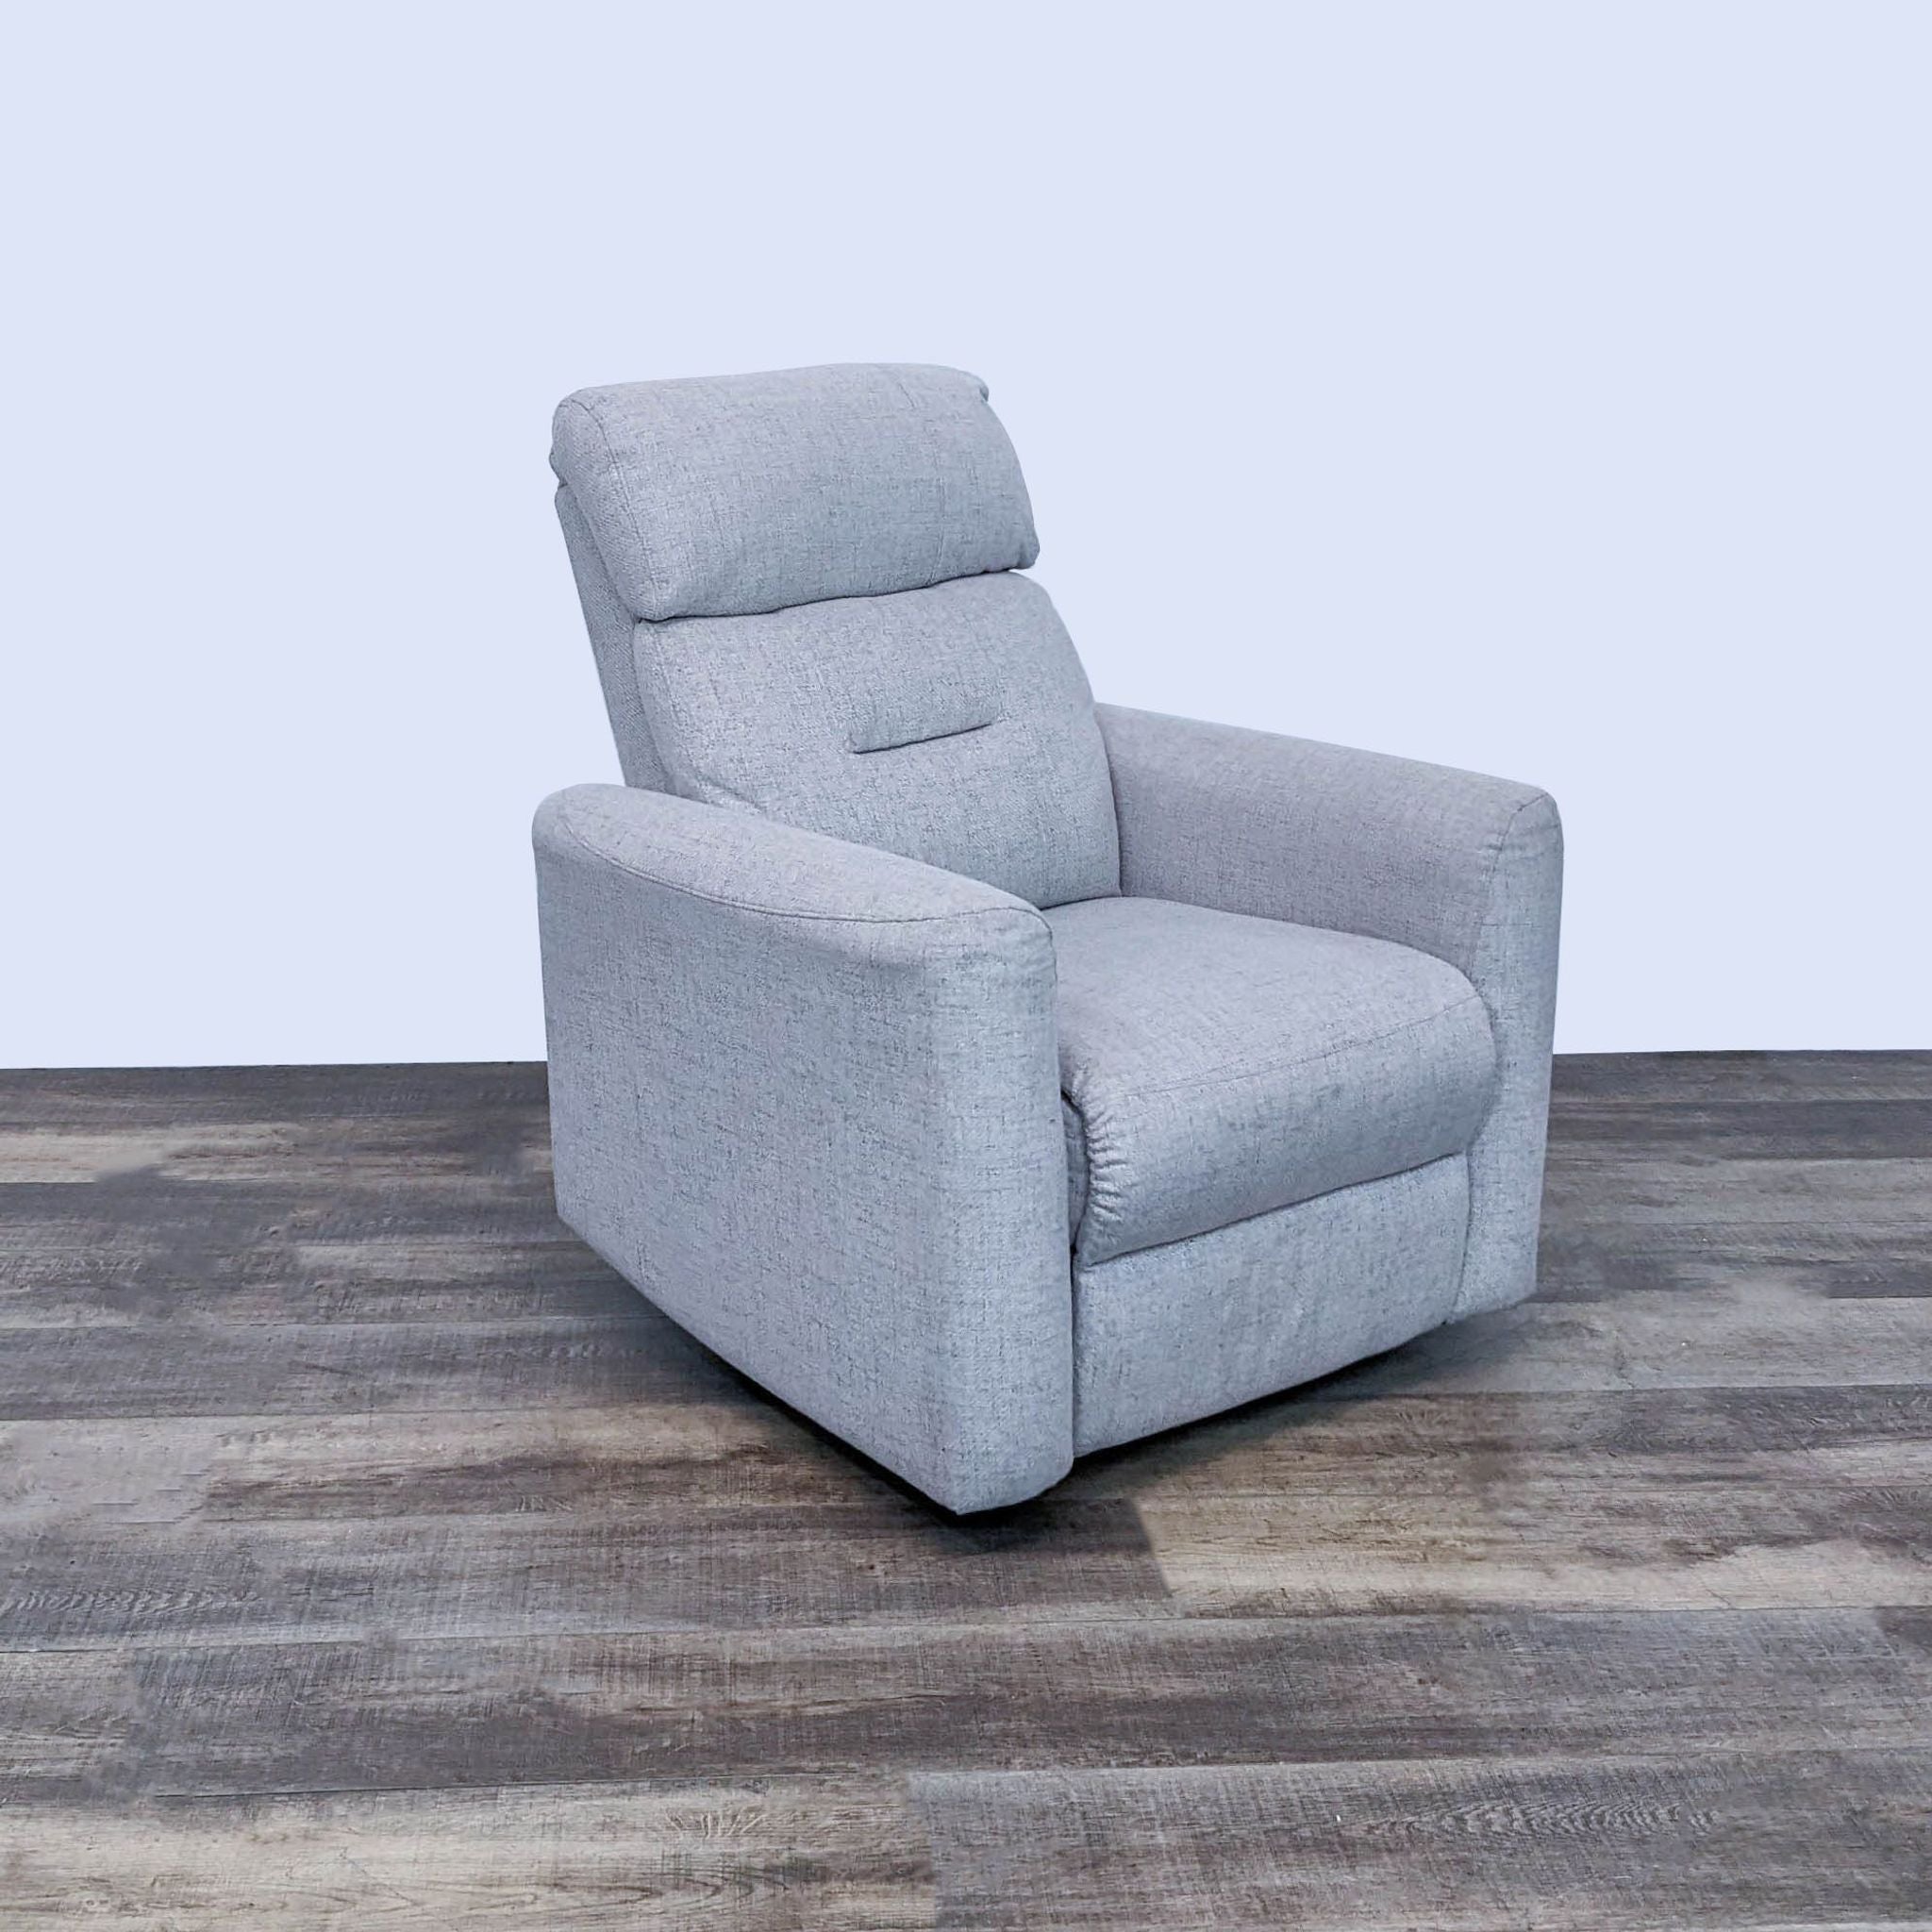 Homcom contemporary manual recliner with 360-degree swivel, upholstered in grey linen fabric on a wooden floor.